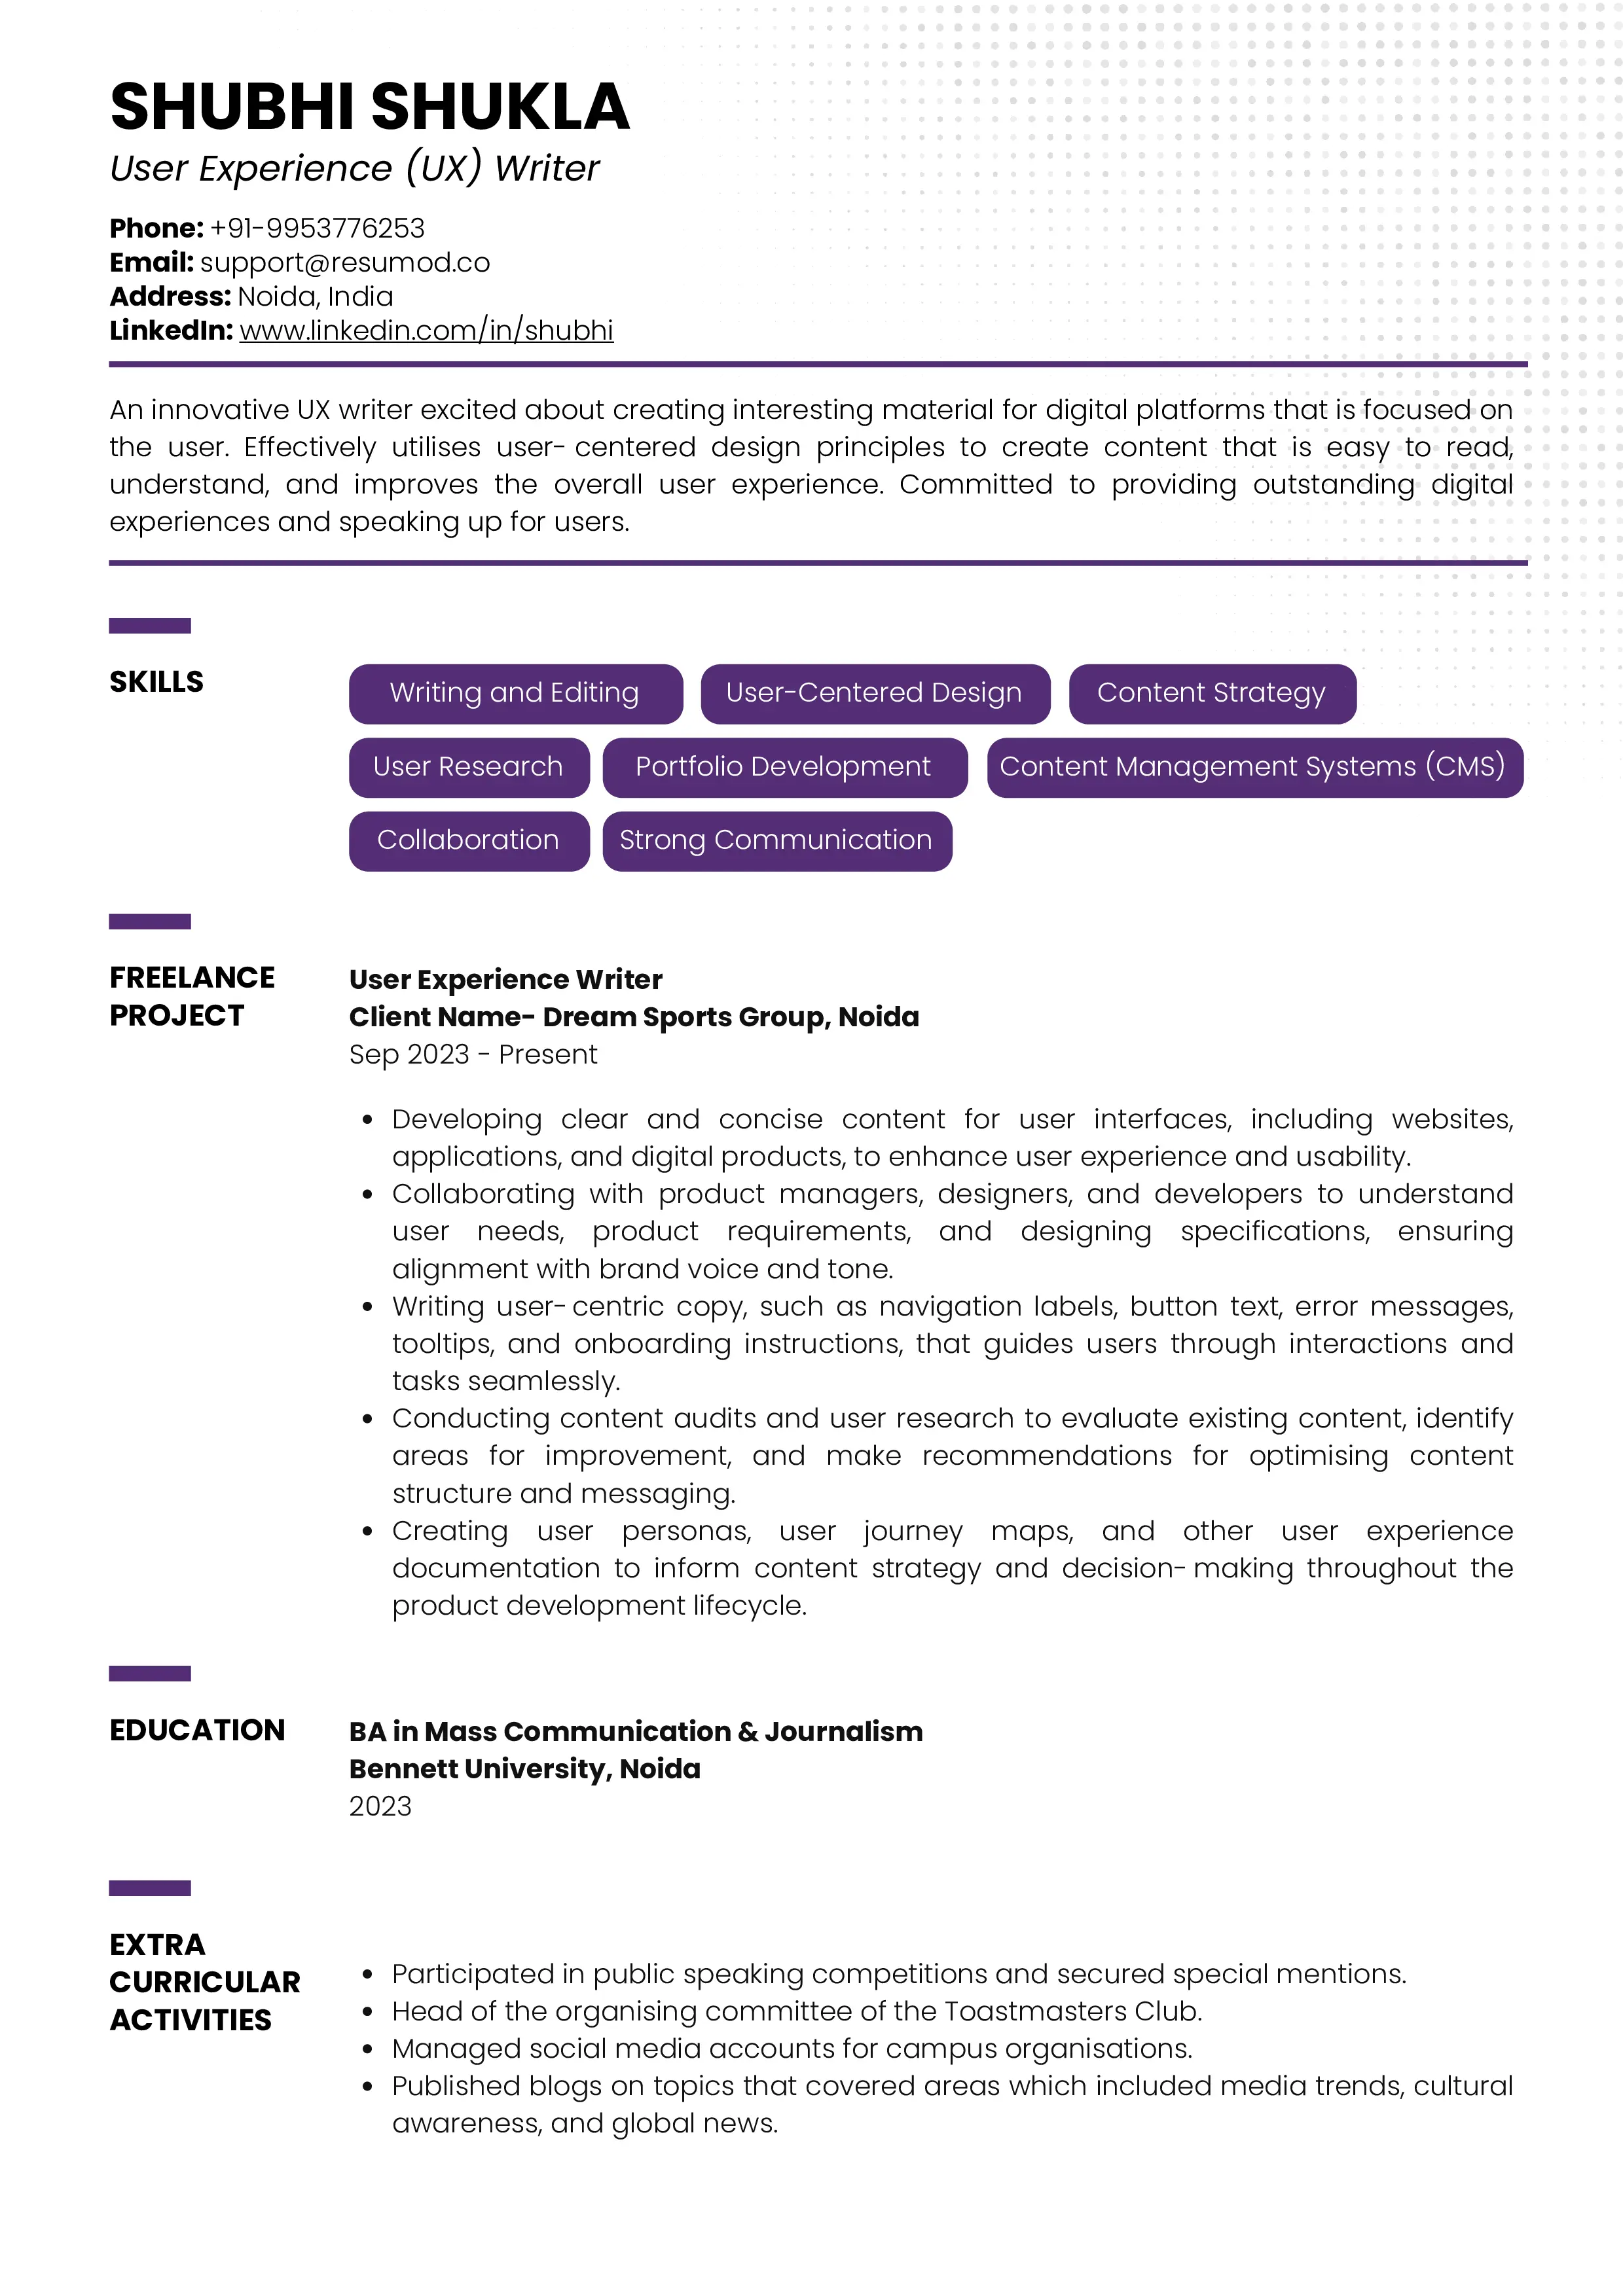 Sample Resume of User Experience Writer | Free Resume Templates & Samples on Resumod.co